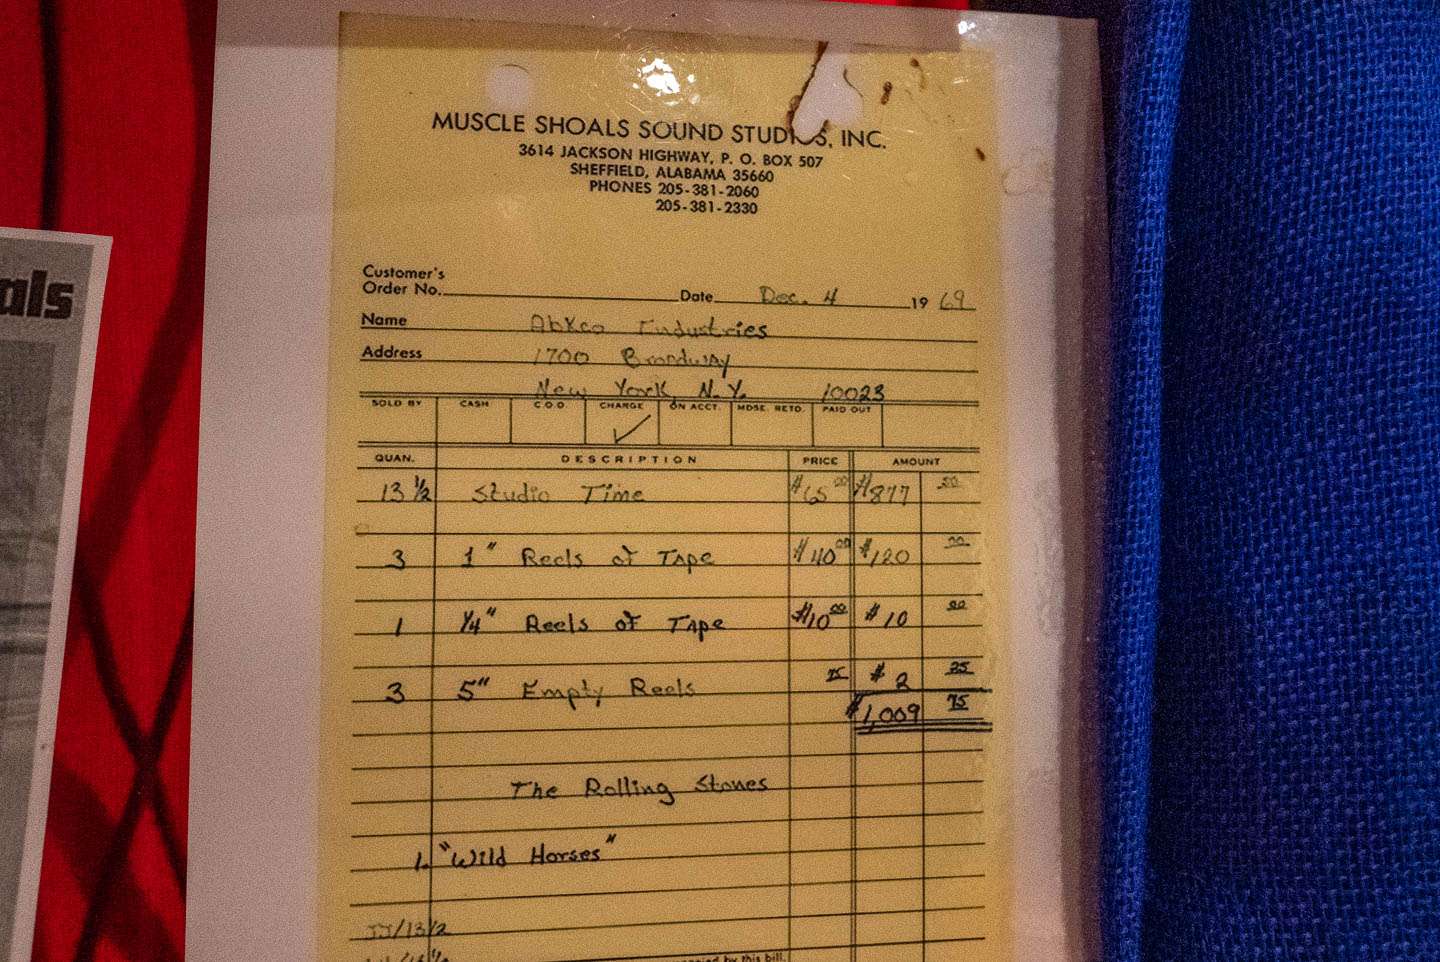 They even have the original invoice to the Stones for it. 